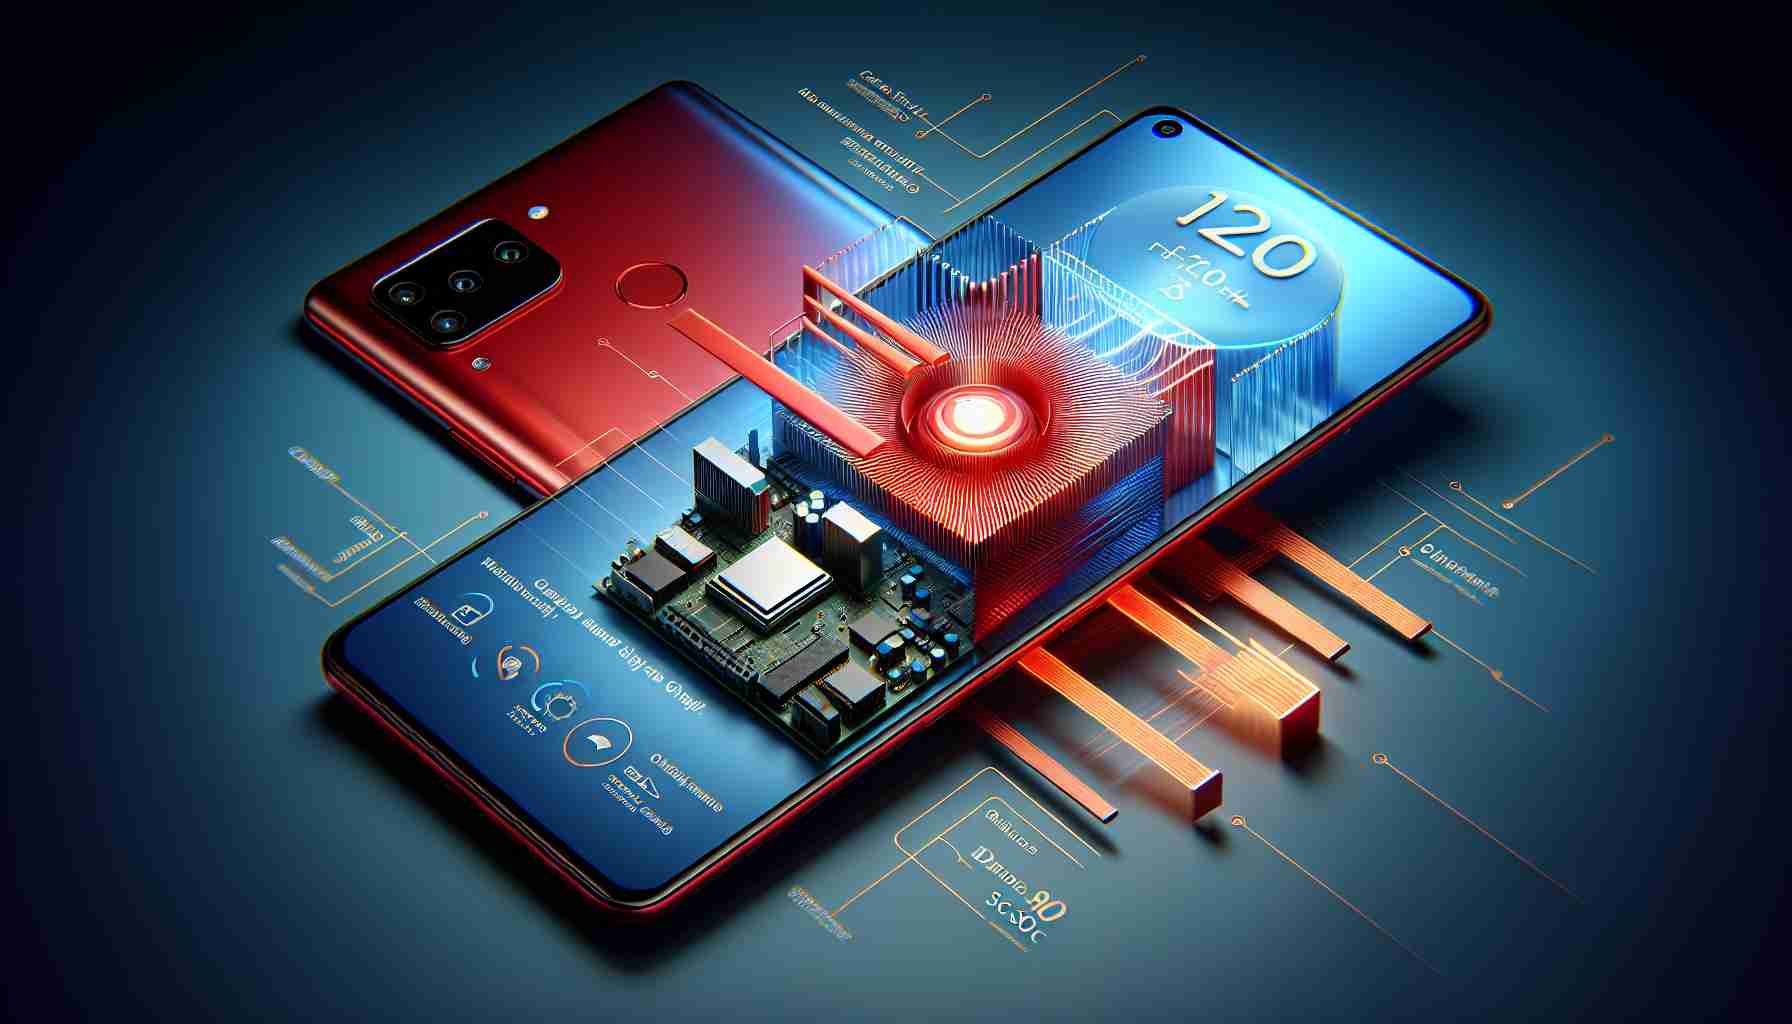 Upcoming Redmi K70 Ultra to Feature 120W Fast Charging and Powerful Dimensity 9300+ SoC